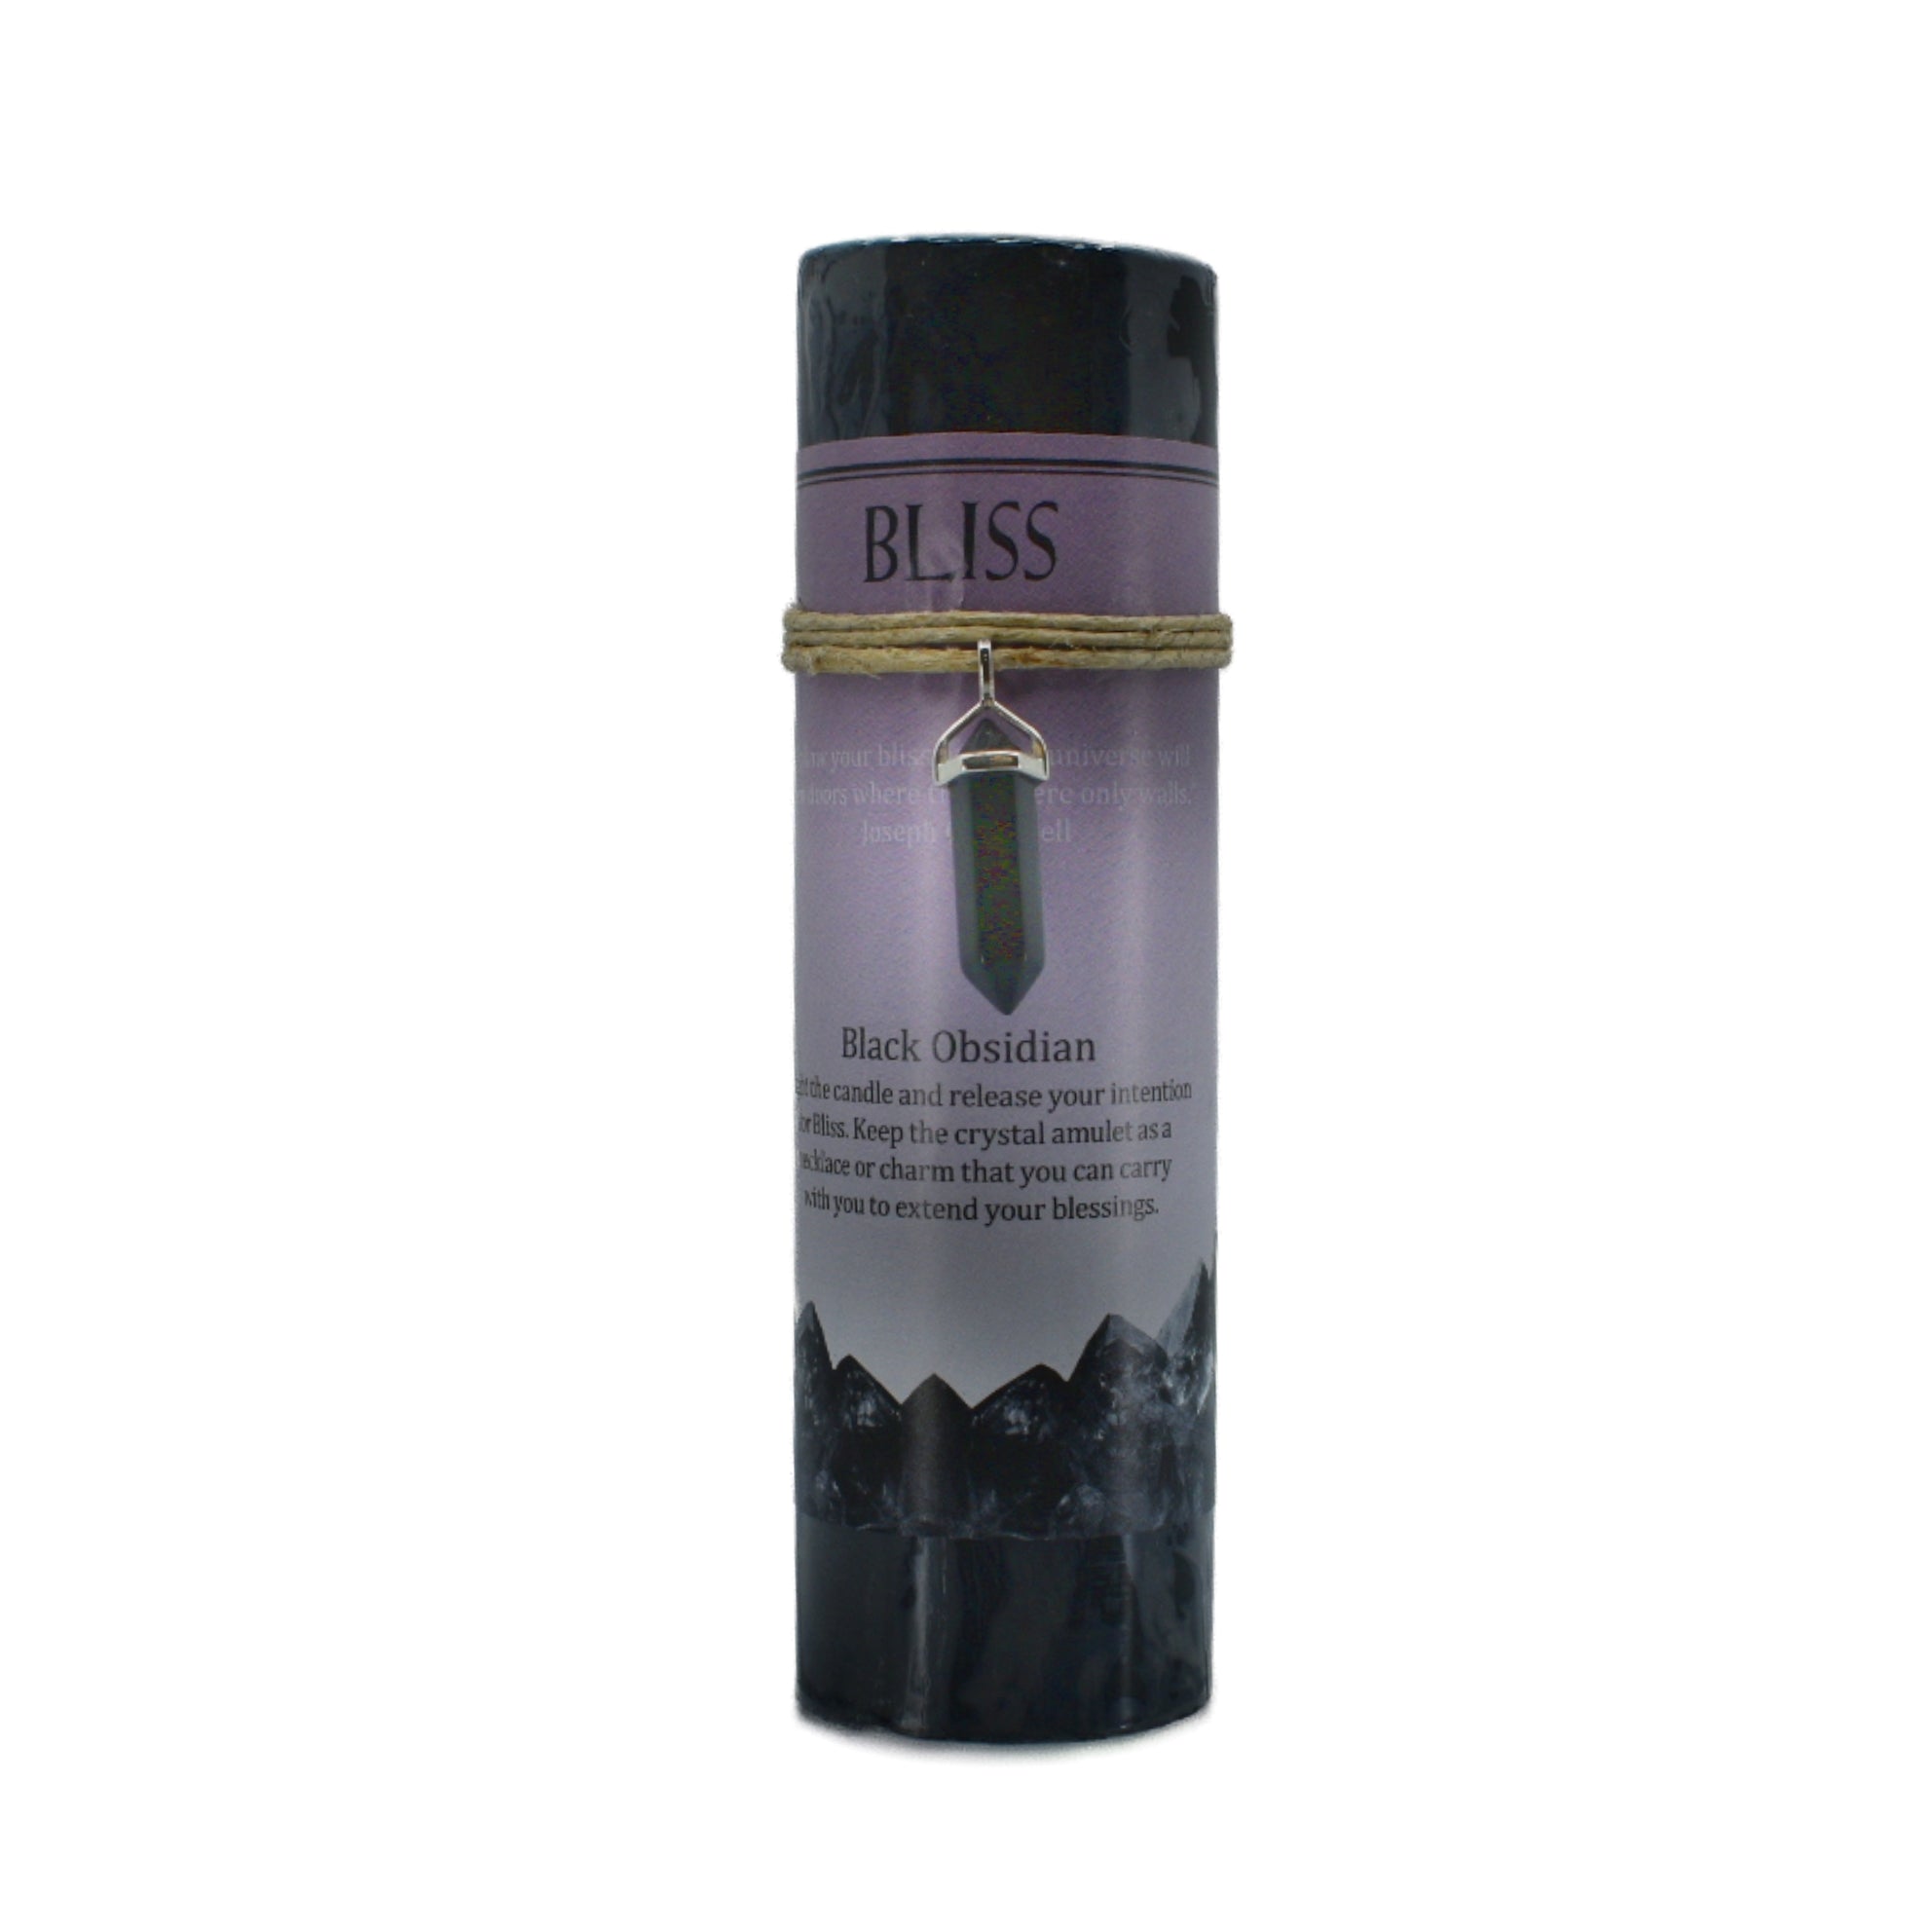 Bliss Crystal Pendant Black Candle has double pointed Black Obsidian crystal wrapped in metal.  Light the candle to find bliss and hang or carry the crystal amulet as a charm to extend your blessings.  The candle is black and has ginger blossom scent.